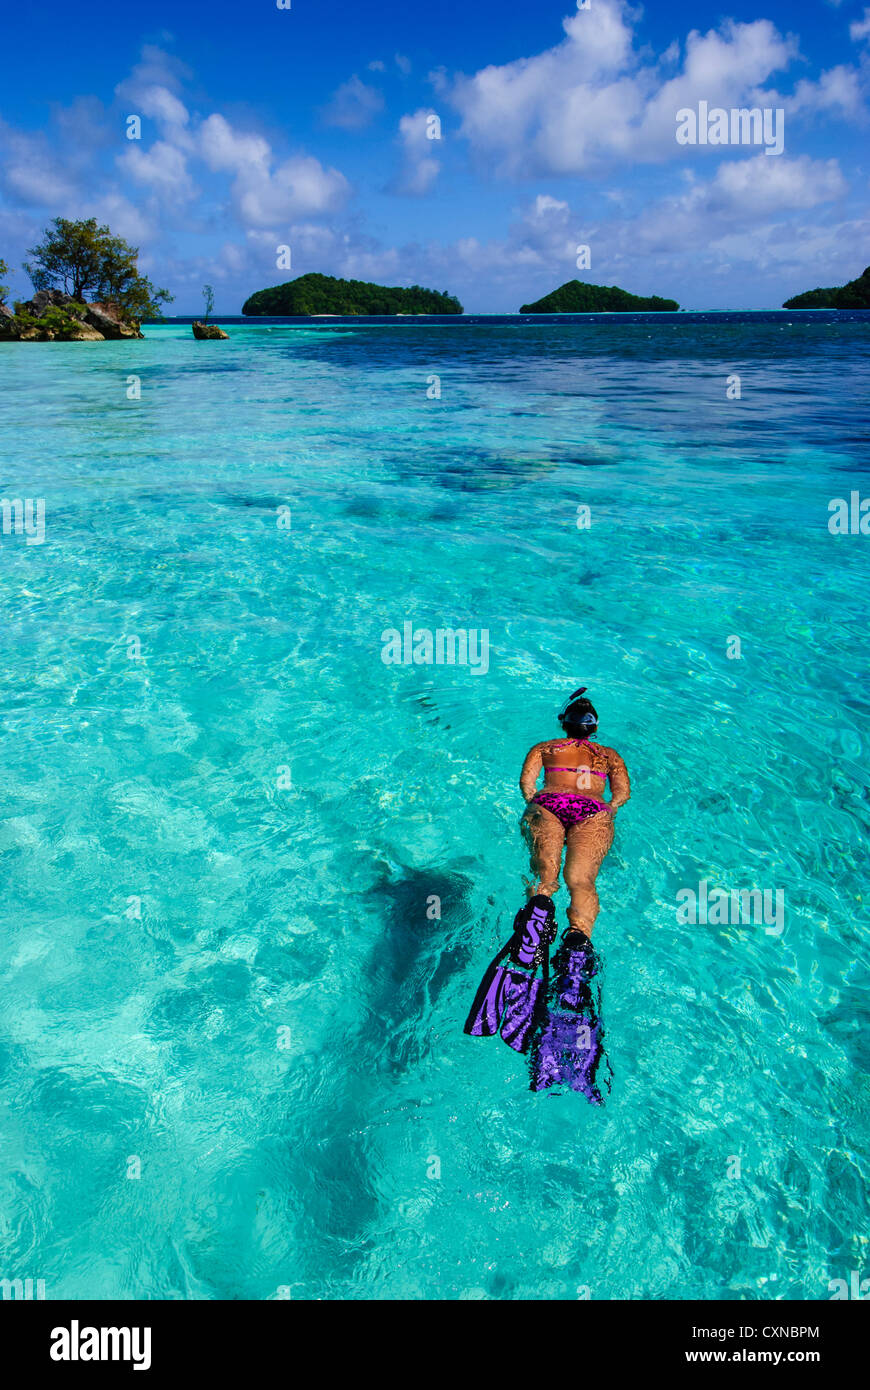 Snorkeler on the blue waters of Ngermeaus Island, Palau Micronesia Stock Photo